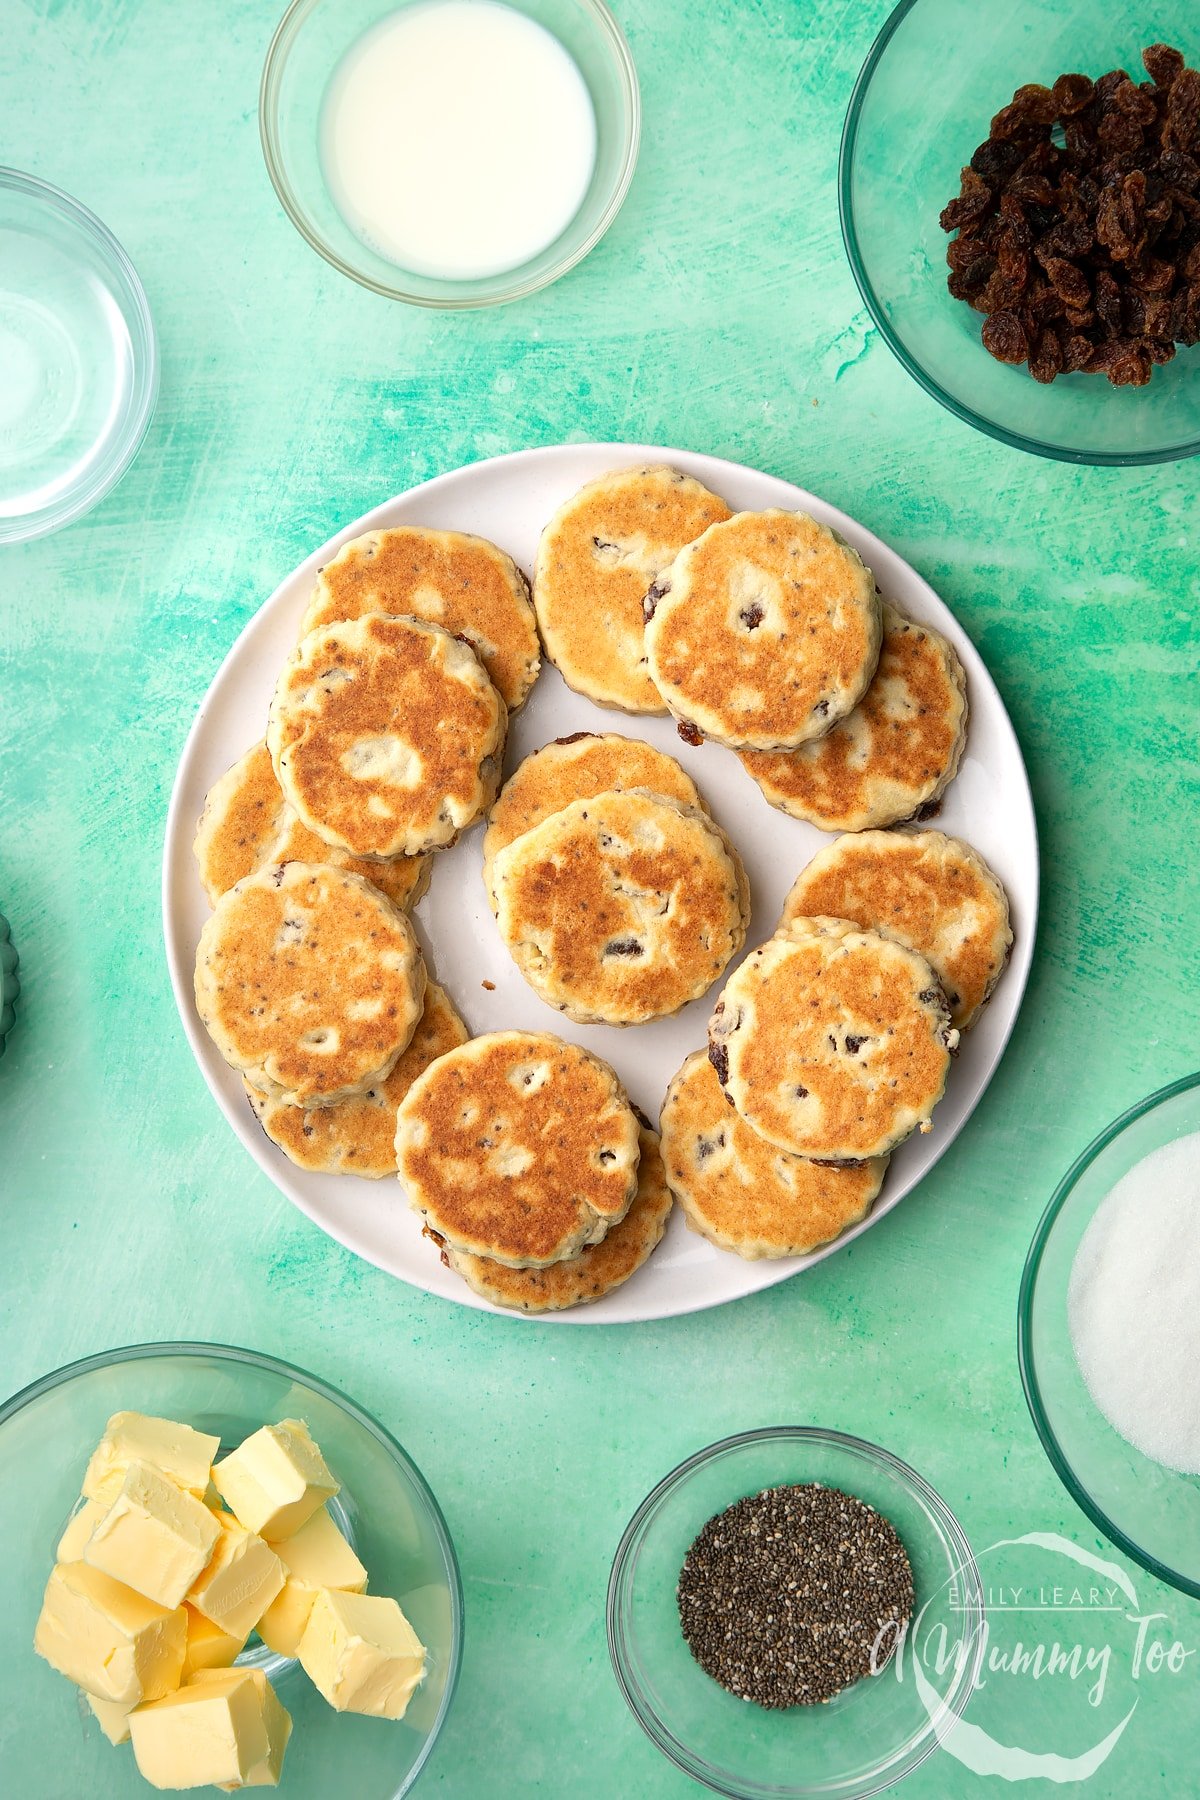 Vegan Welsh cakes arranged on a white plate. Surrounding the plate are ingredients to make them.